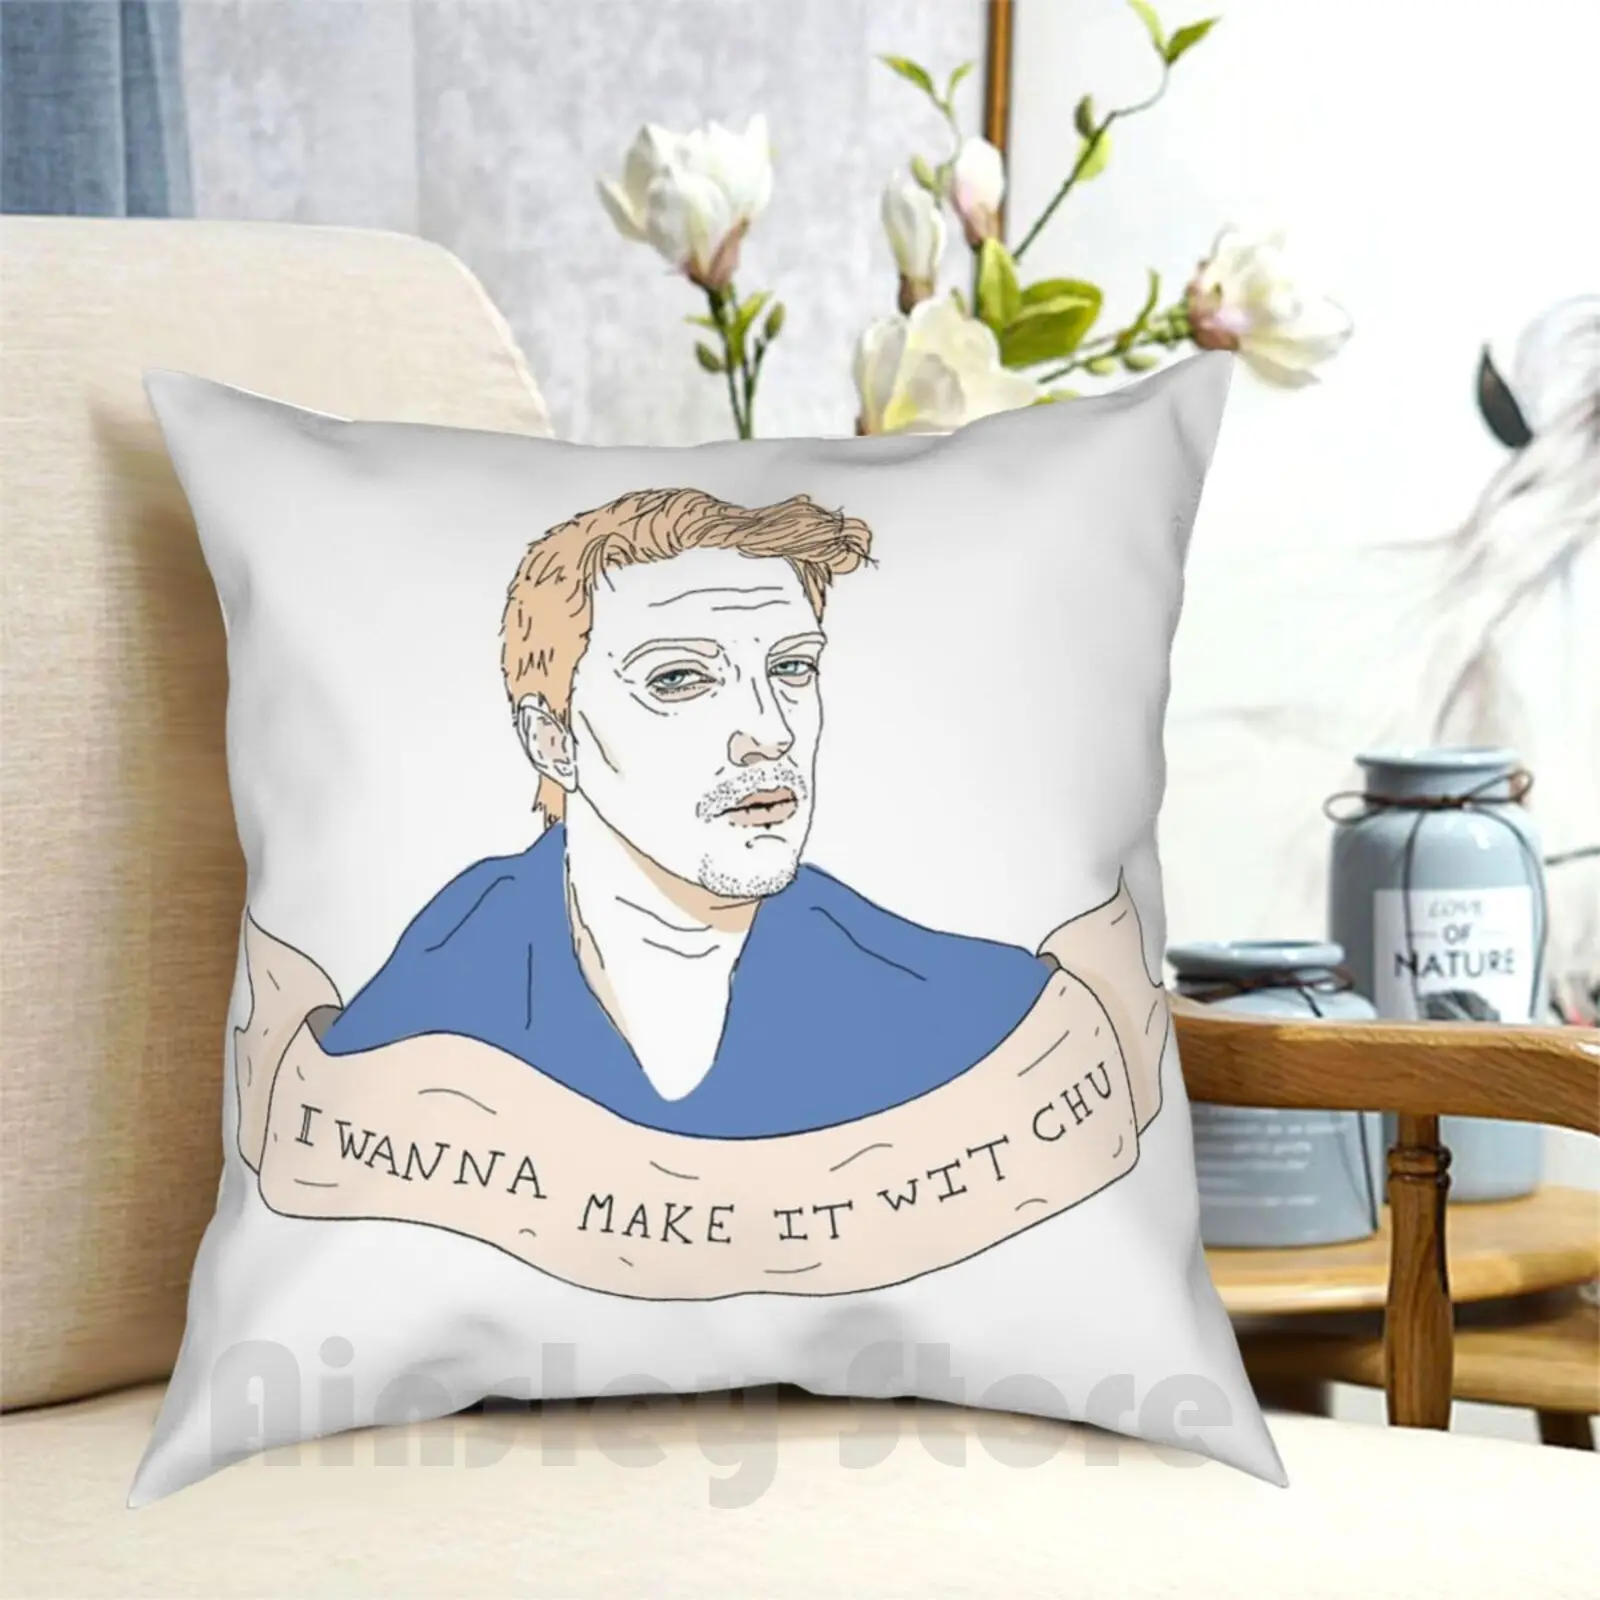 

I Wanna Make It Wit Chu Pillow Case Printed Home Soft Throw Pillow Josh Homme Queens Stone Age Band Alternative Cool